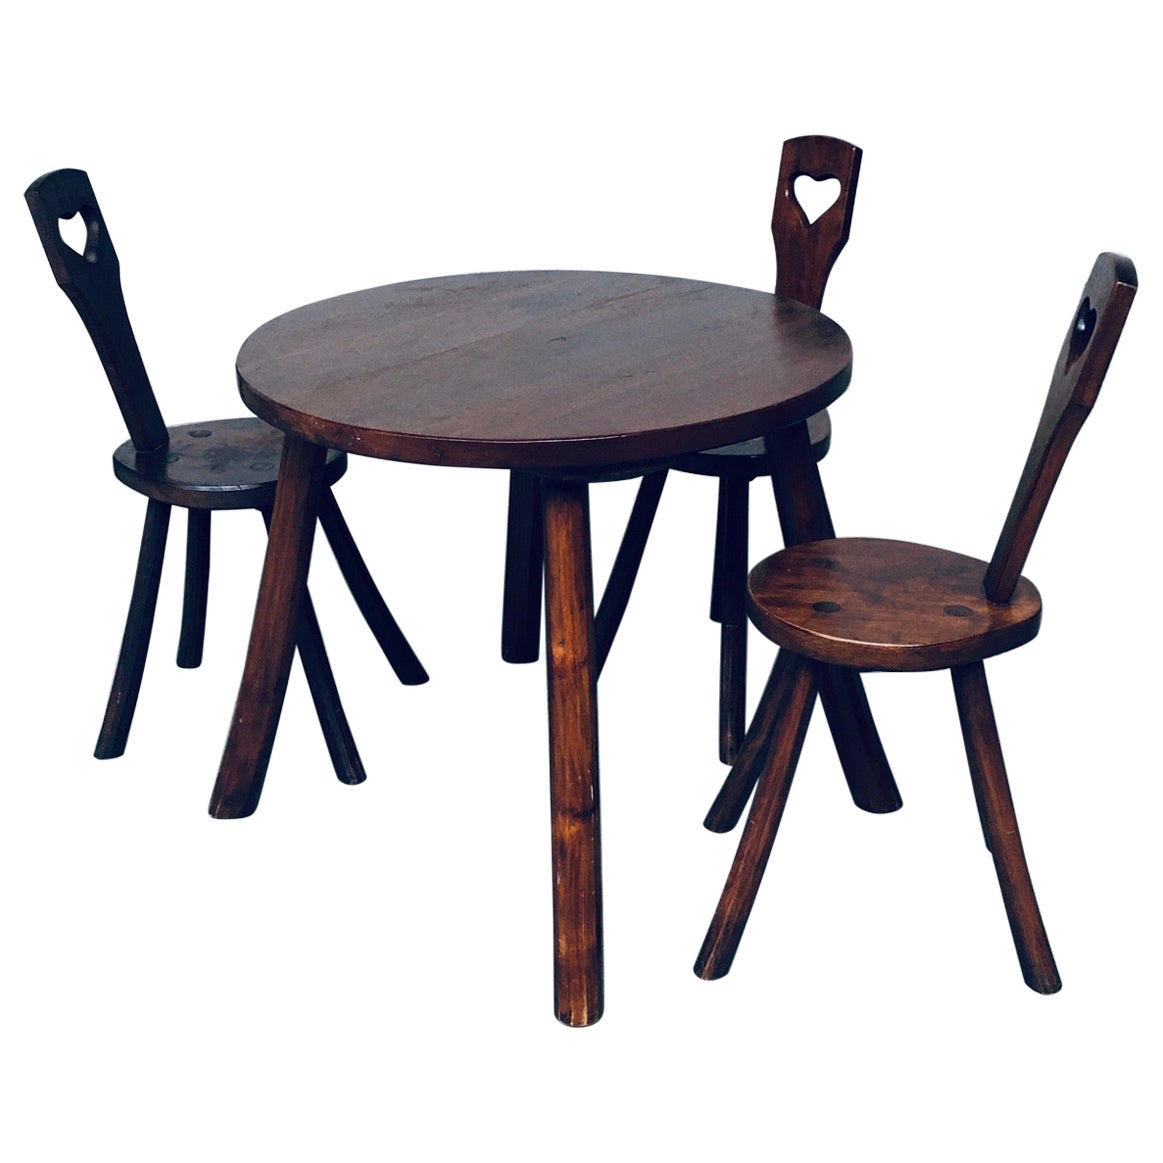 Wabi Sabi Handcrafted Design Solid Oak Dining Table & Chairs, 1940's France For Sale